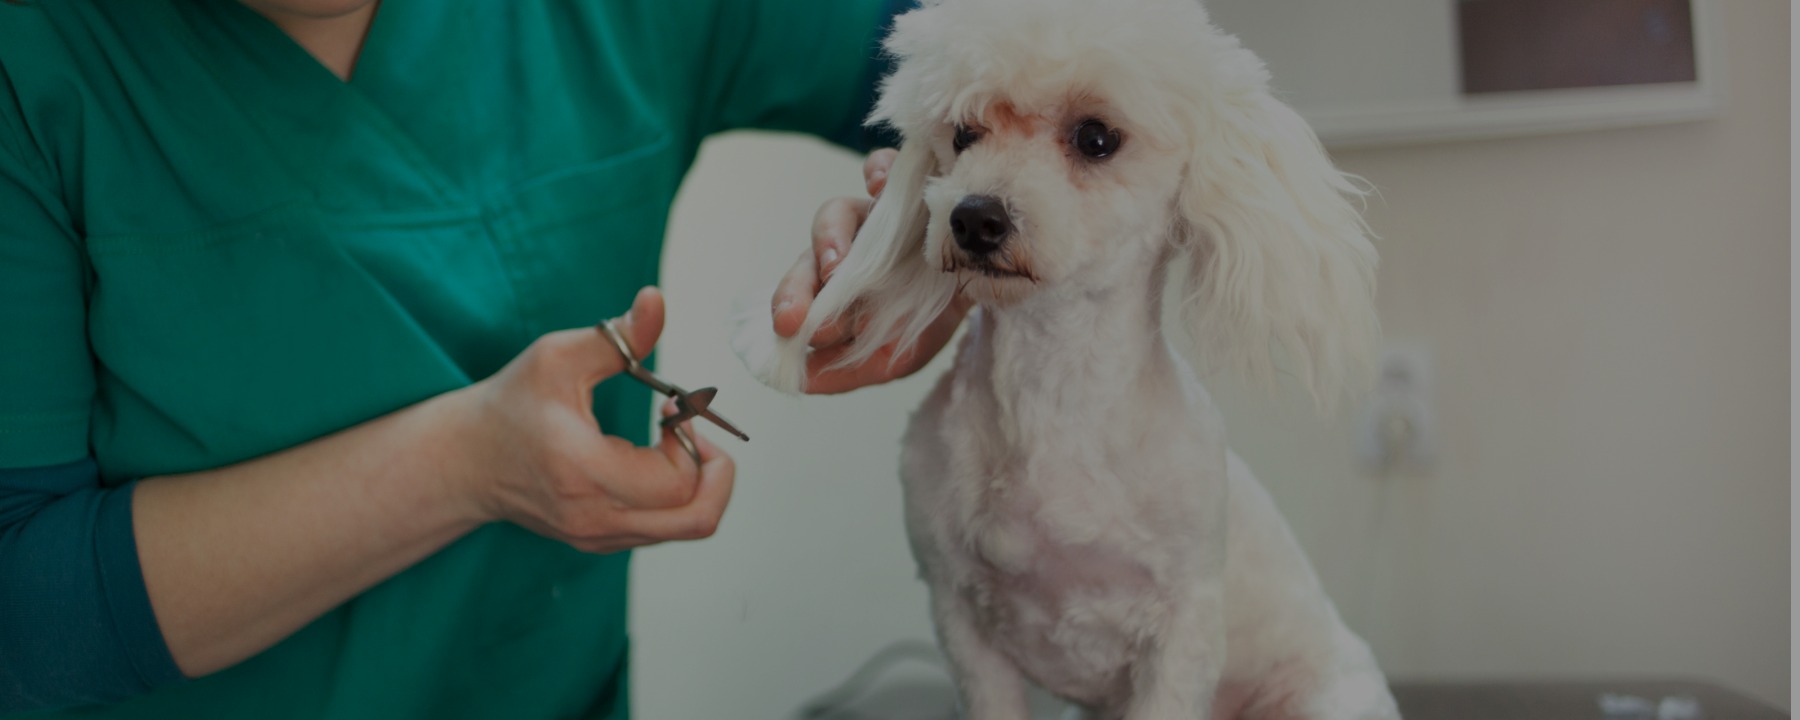 So You’ve Decided to Get Your Dog Grooming Certification Online. Now What?